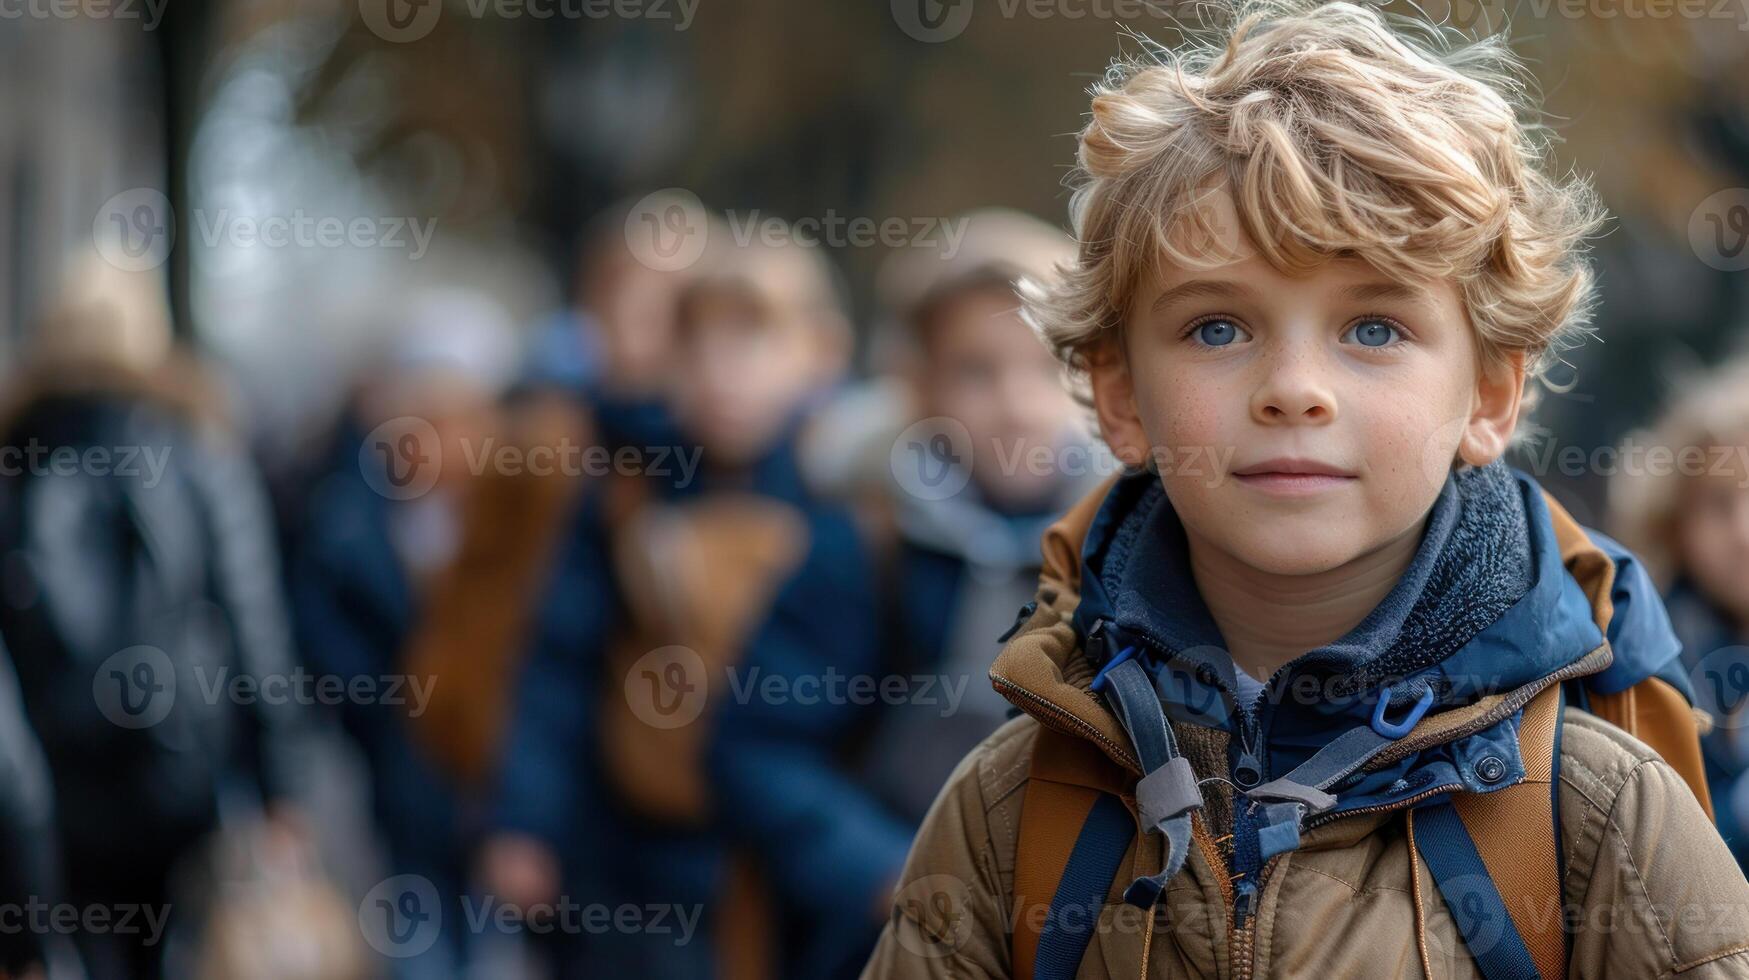 A young boy with striking blue eyes stands before a crowd of people photo